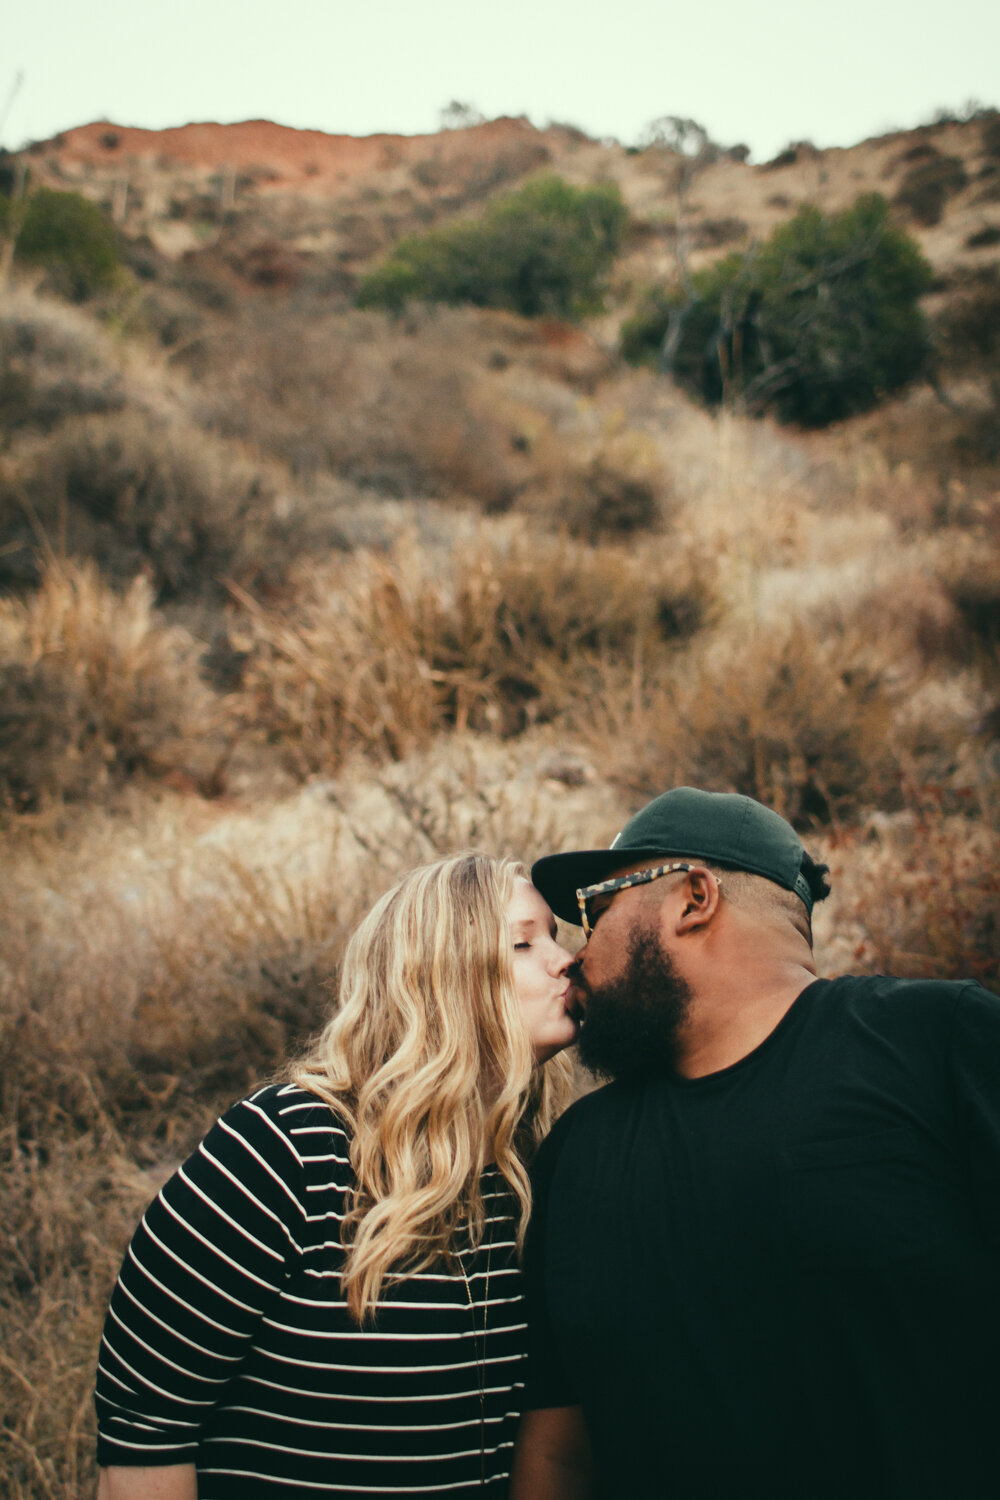 engagement engaged photography photographe marriage wedding photographer corse corsica california desert foothill ranch whiting lifestyle Anza Creative-35.jpg